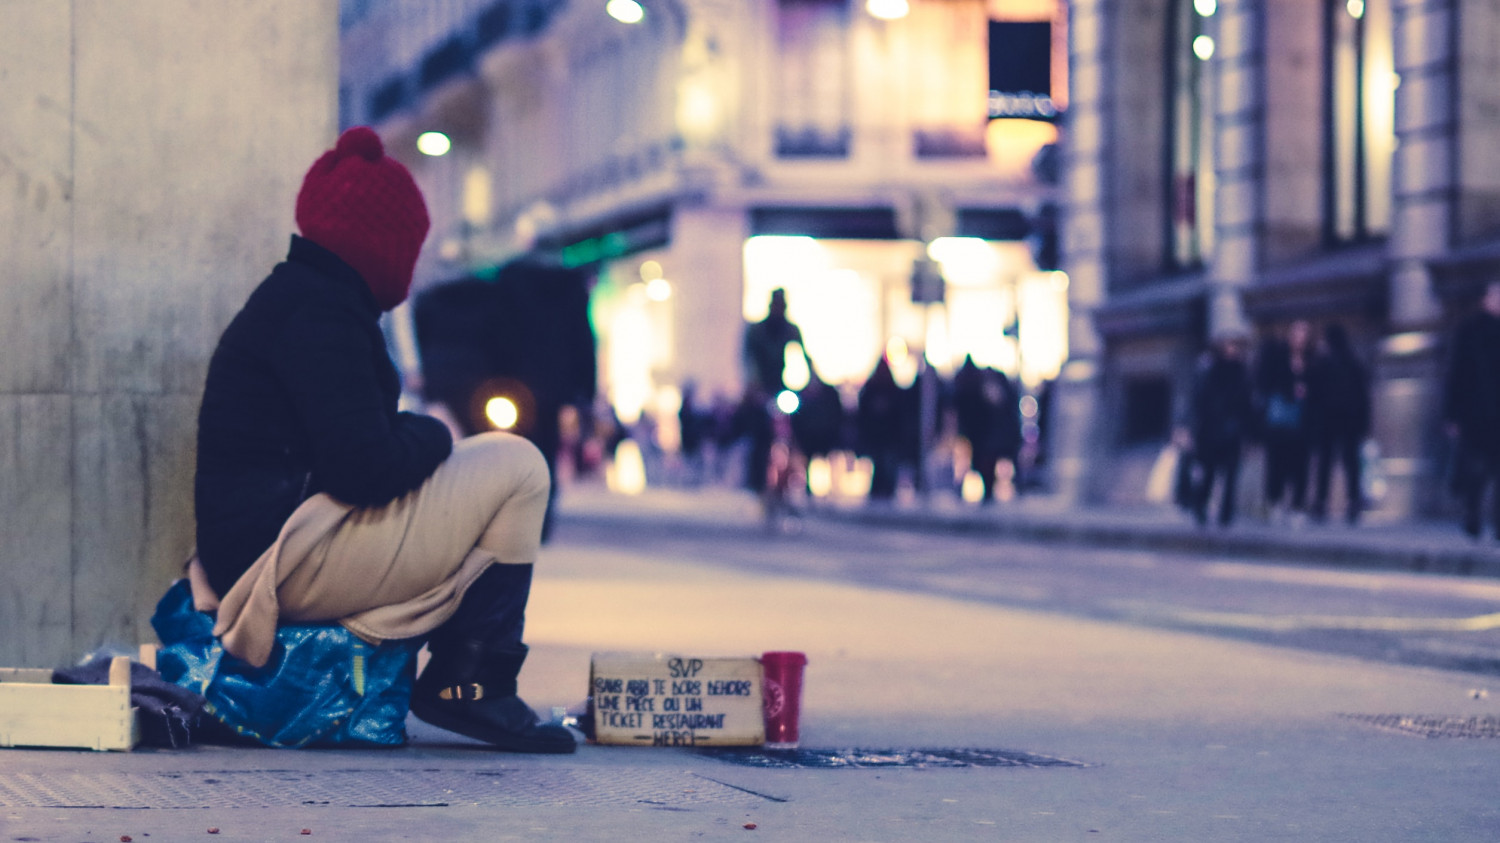 Image of a homeless woman seated on a cardboard box in a busy highstreet